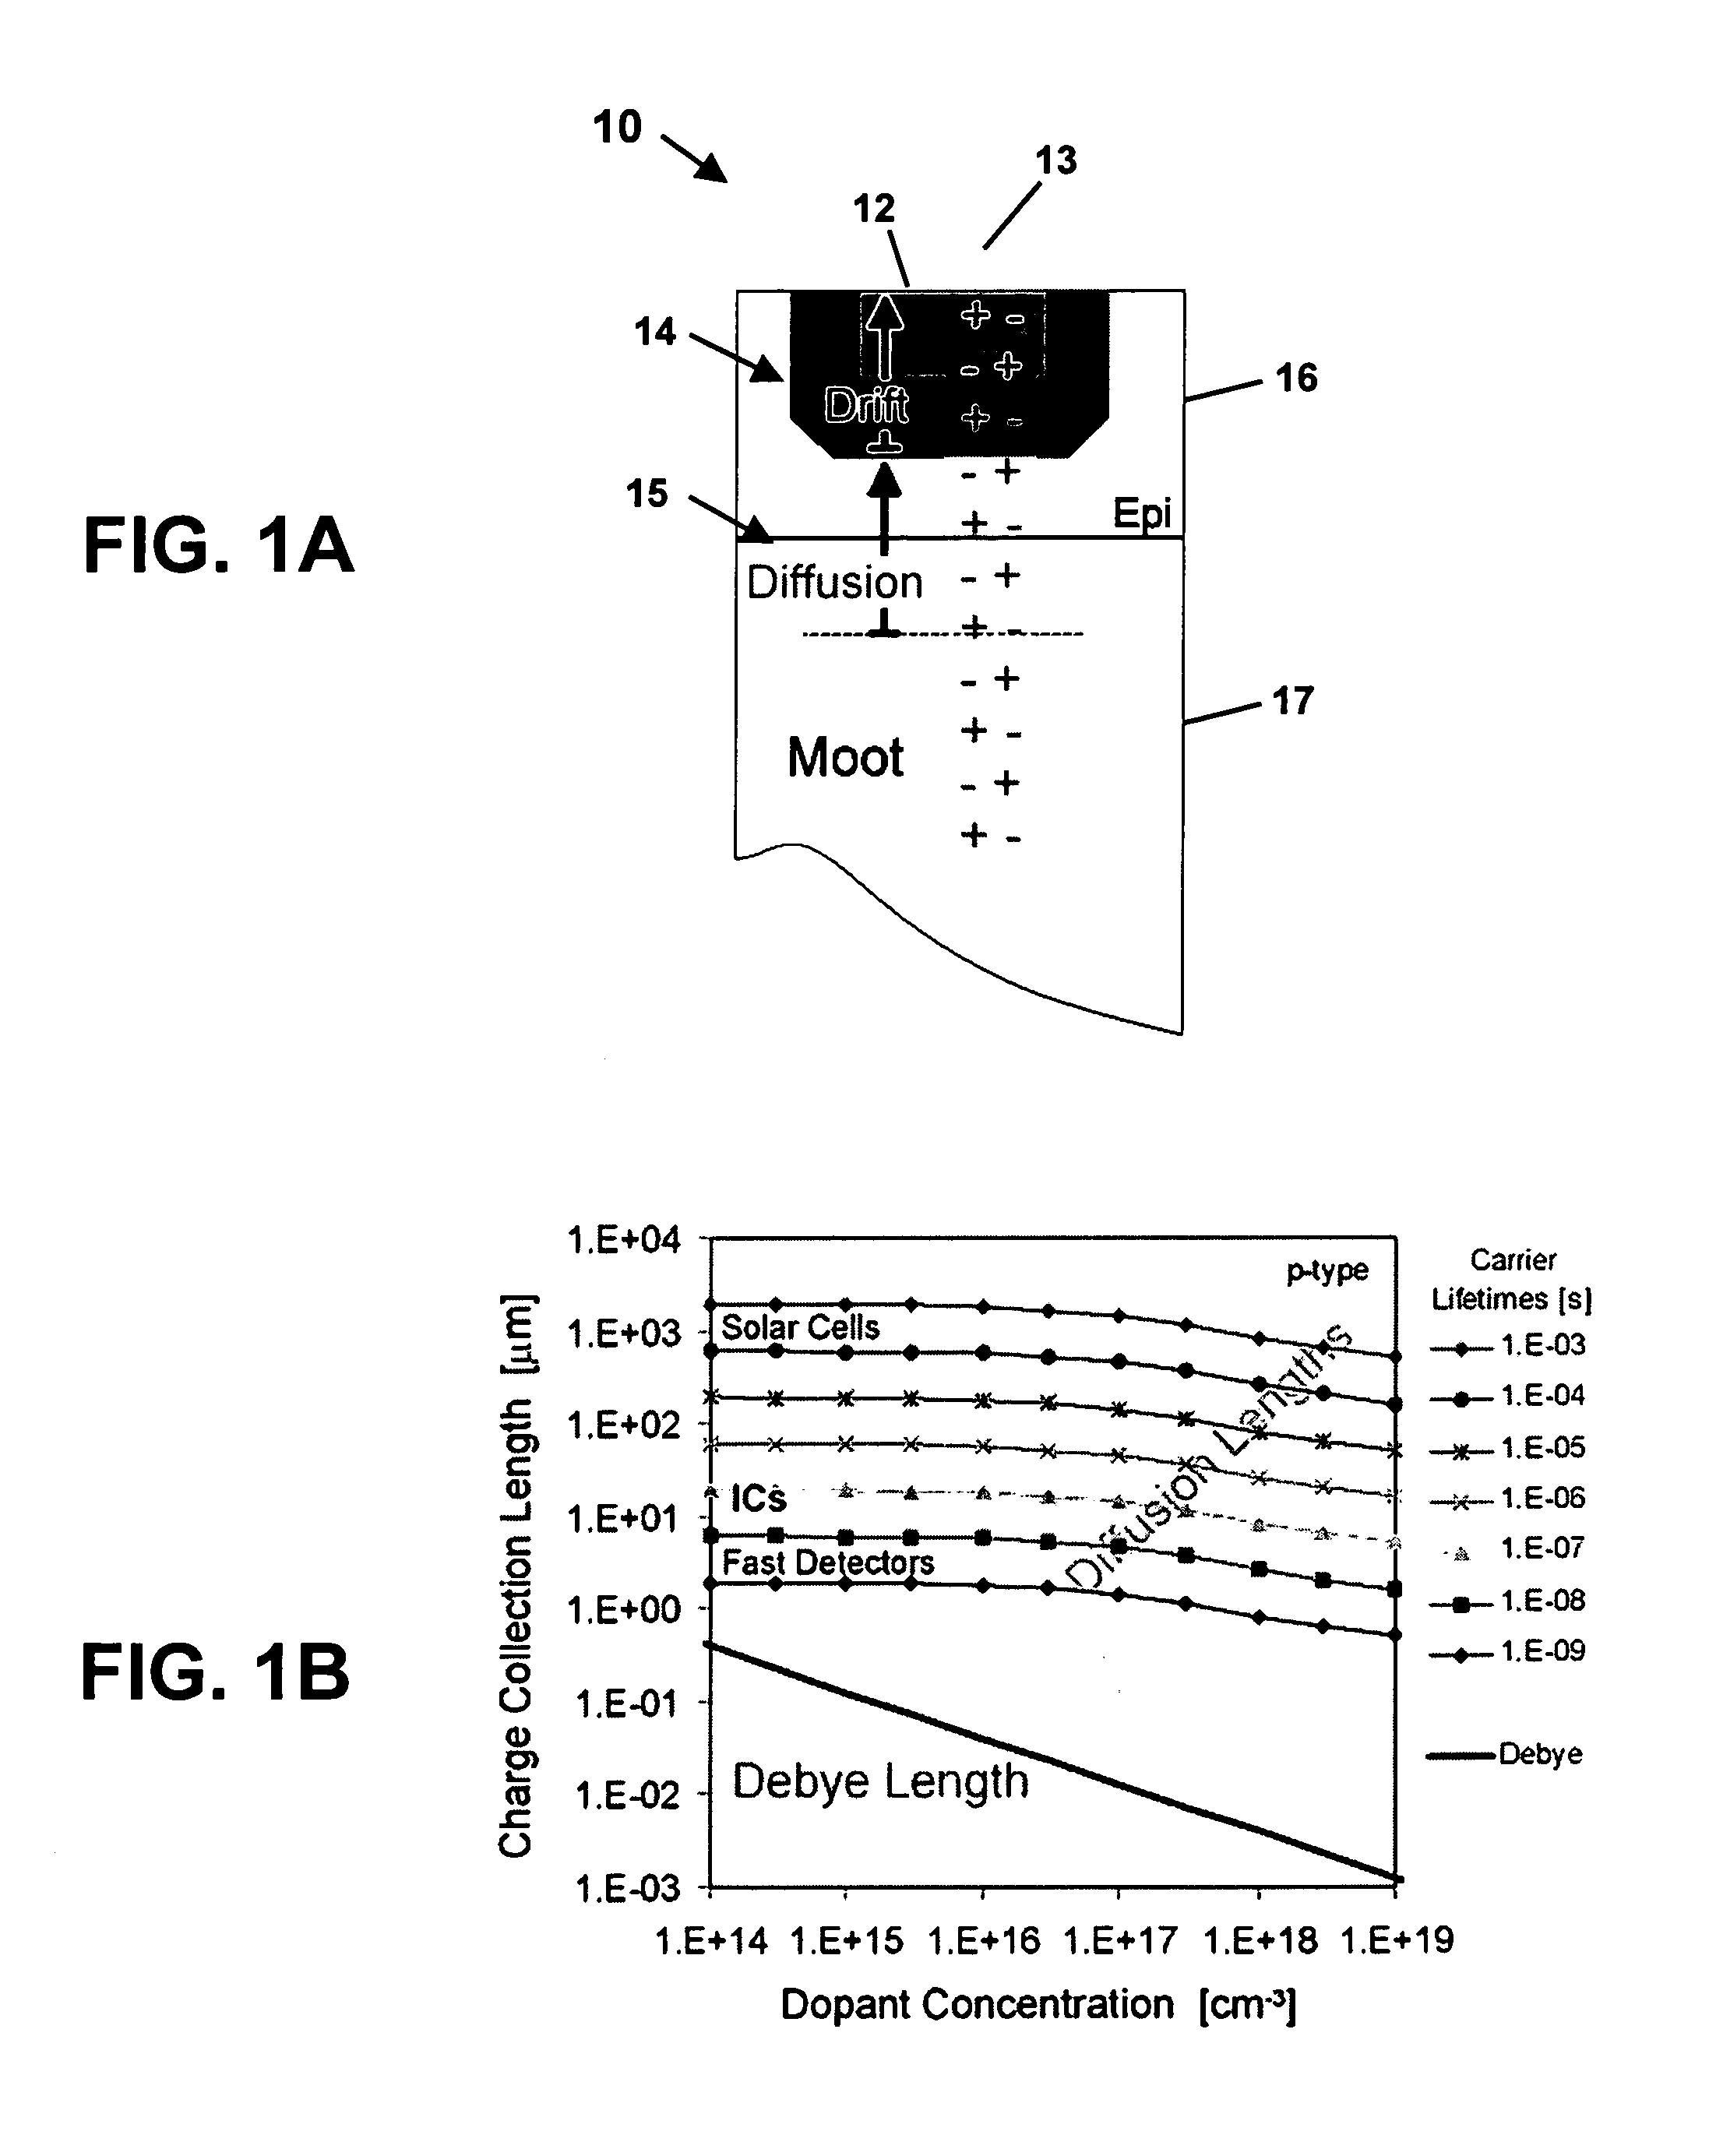 Laser-based irradiation apparatus and methods for monitoring the dose-rate response of semiconductor devices